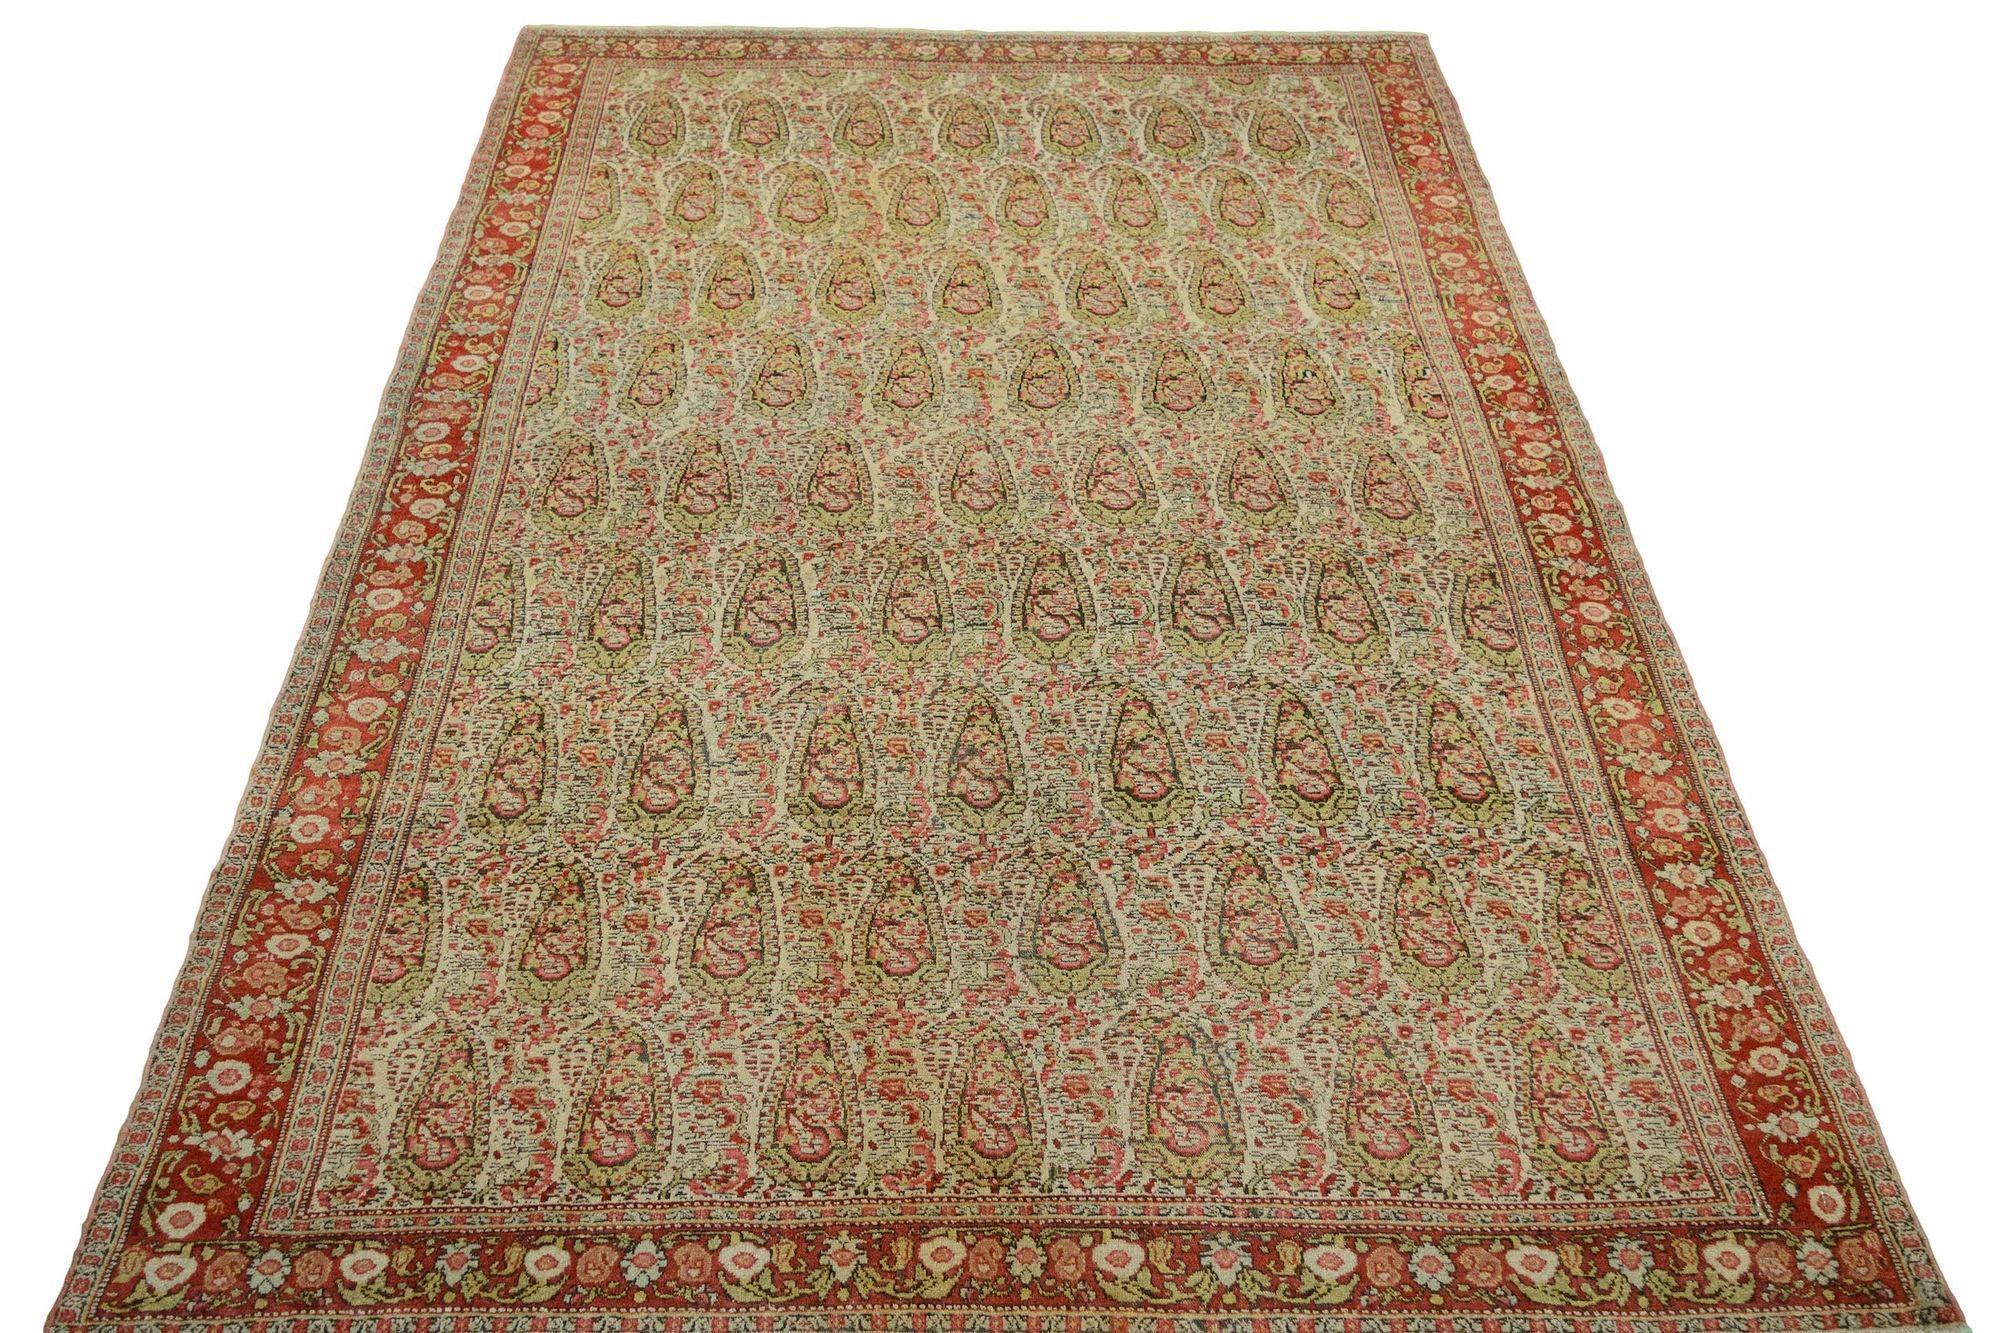 Wool Antique Senneh Rug 2.02m x 1.36m For Sale